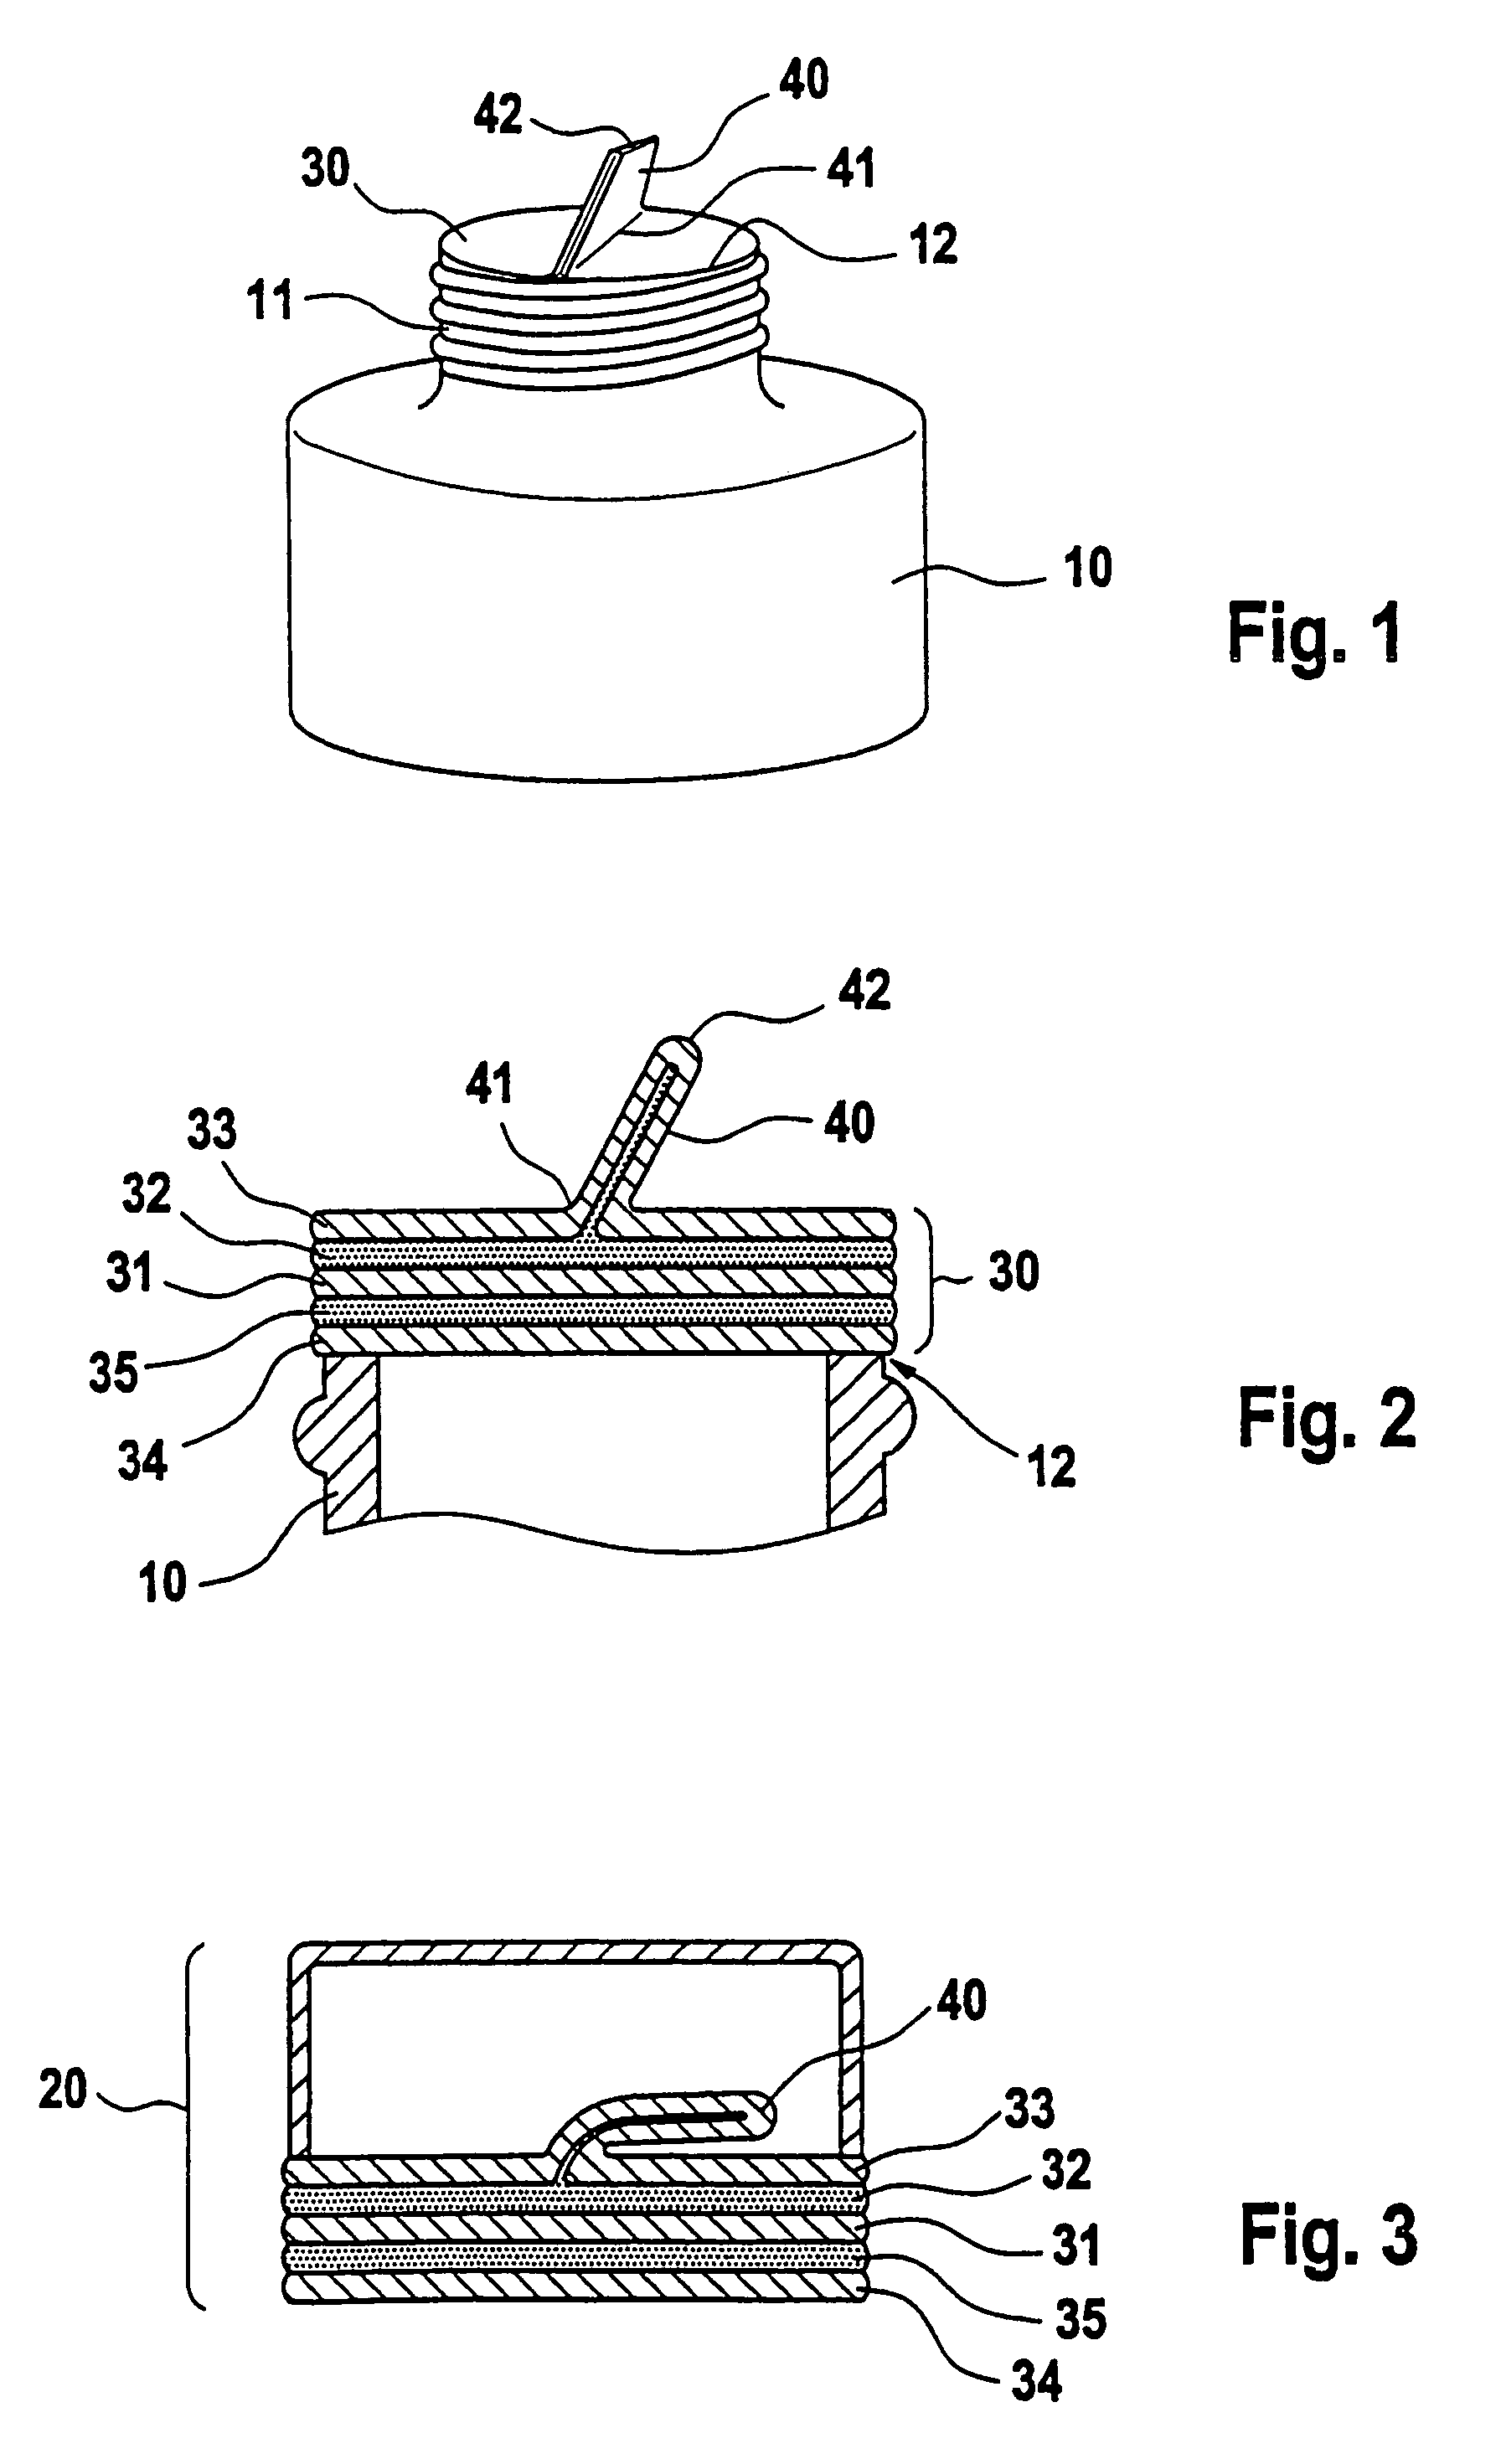 Sealing disc and film composite for a closure of a container